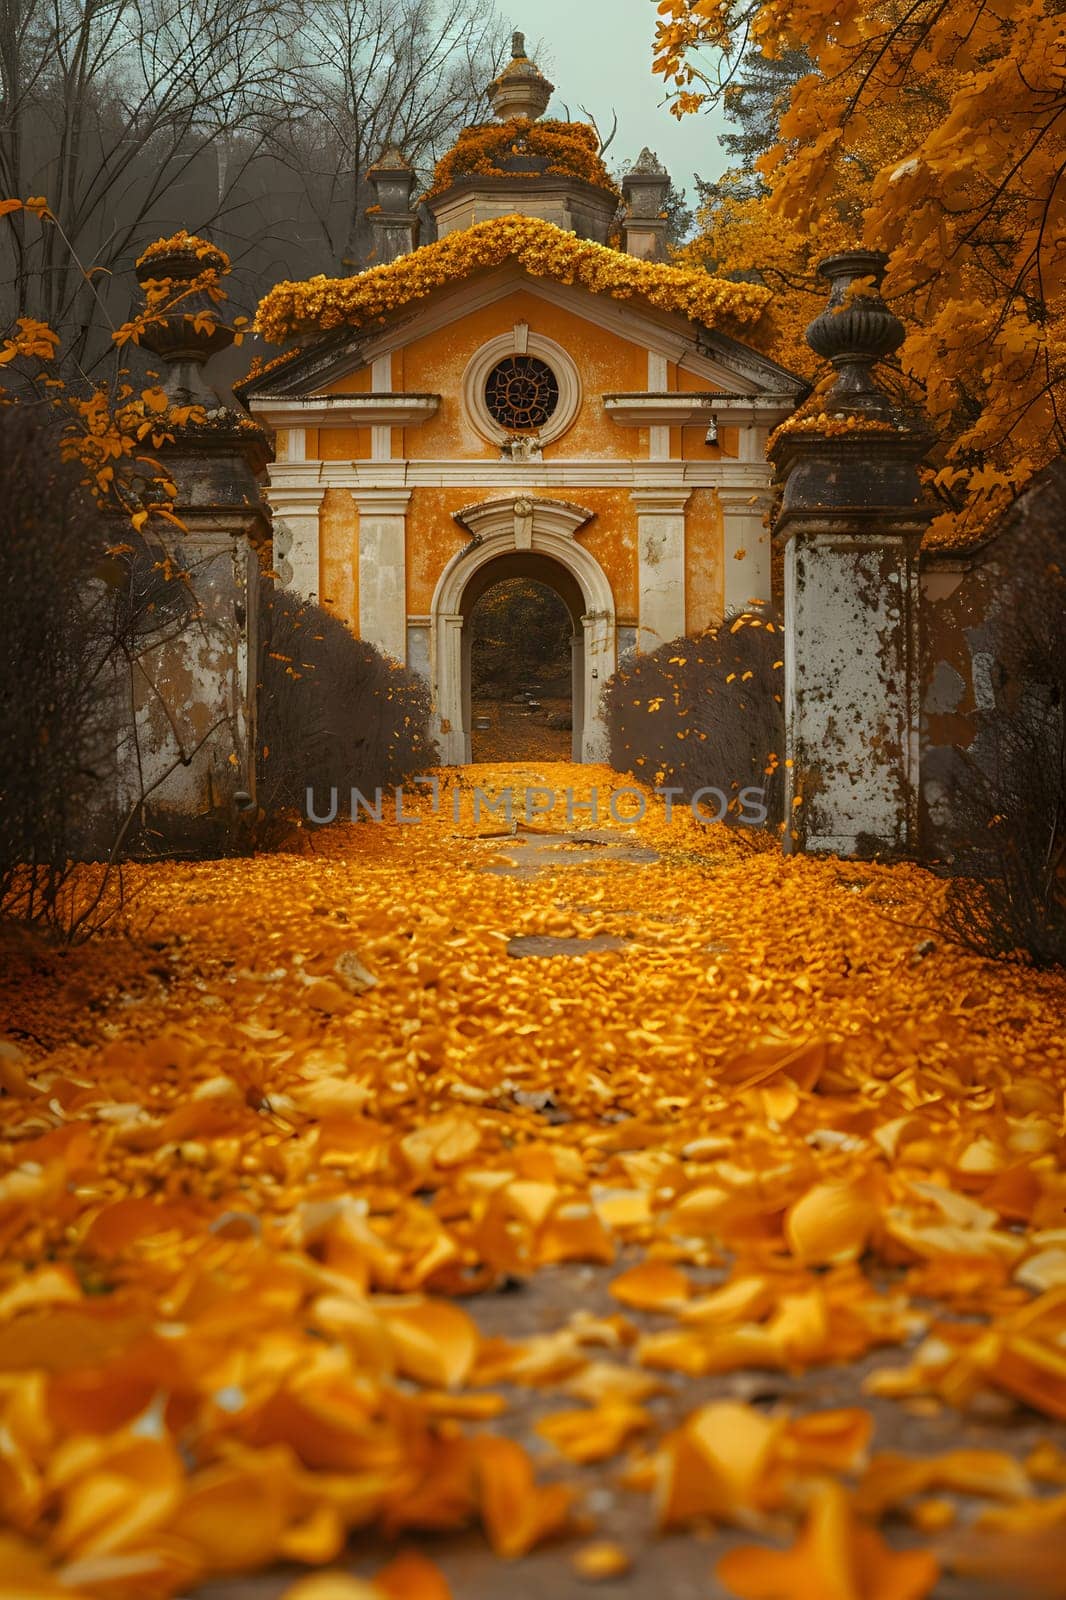 A building surrounded by a blanket of fallen leaves, blending into the natural landscape. The sun shines on the yellow leaves, creating a beautiful botanic scene